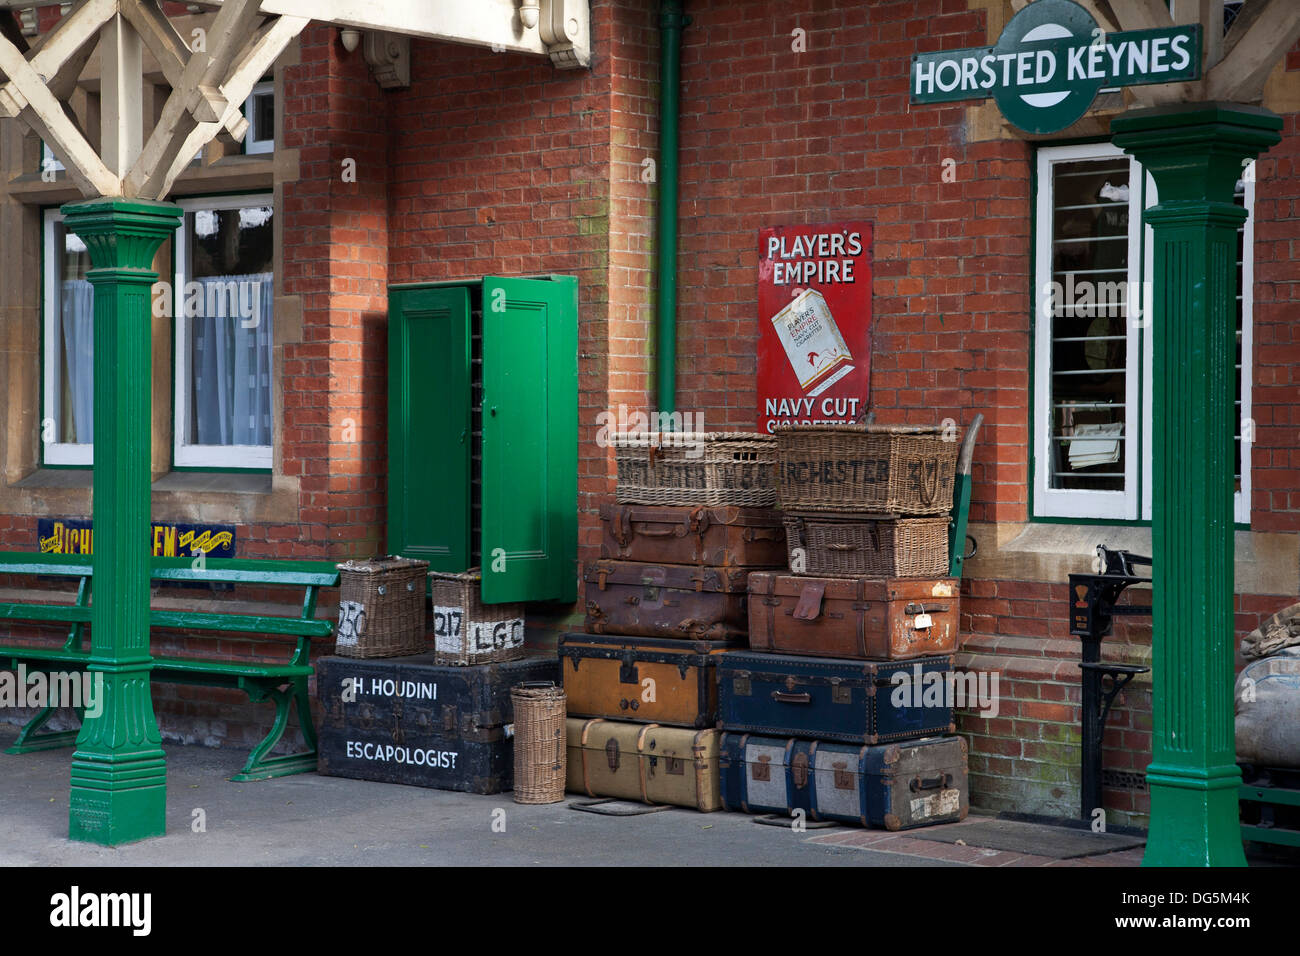 Vintage suitcases stacked against the wall of Horsted Keynes railway platform. H. Houdini escapologist case also. Stock Photo